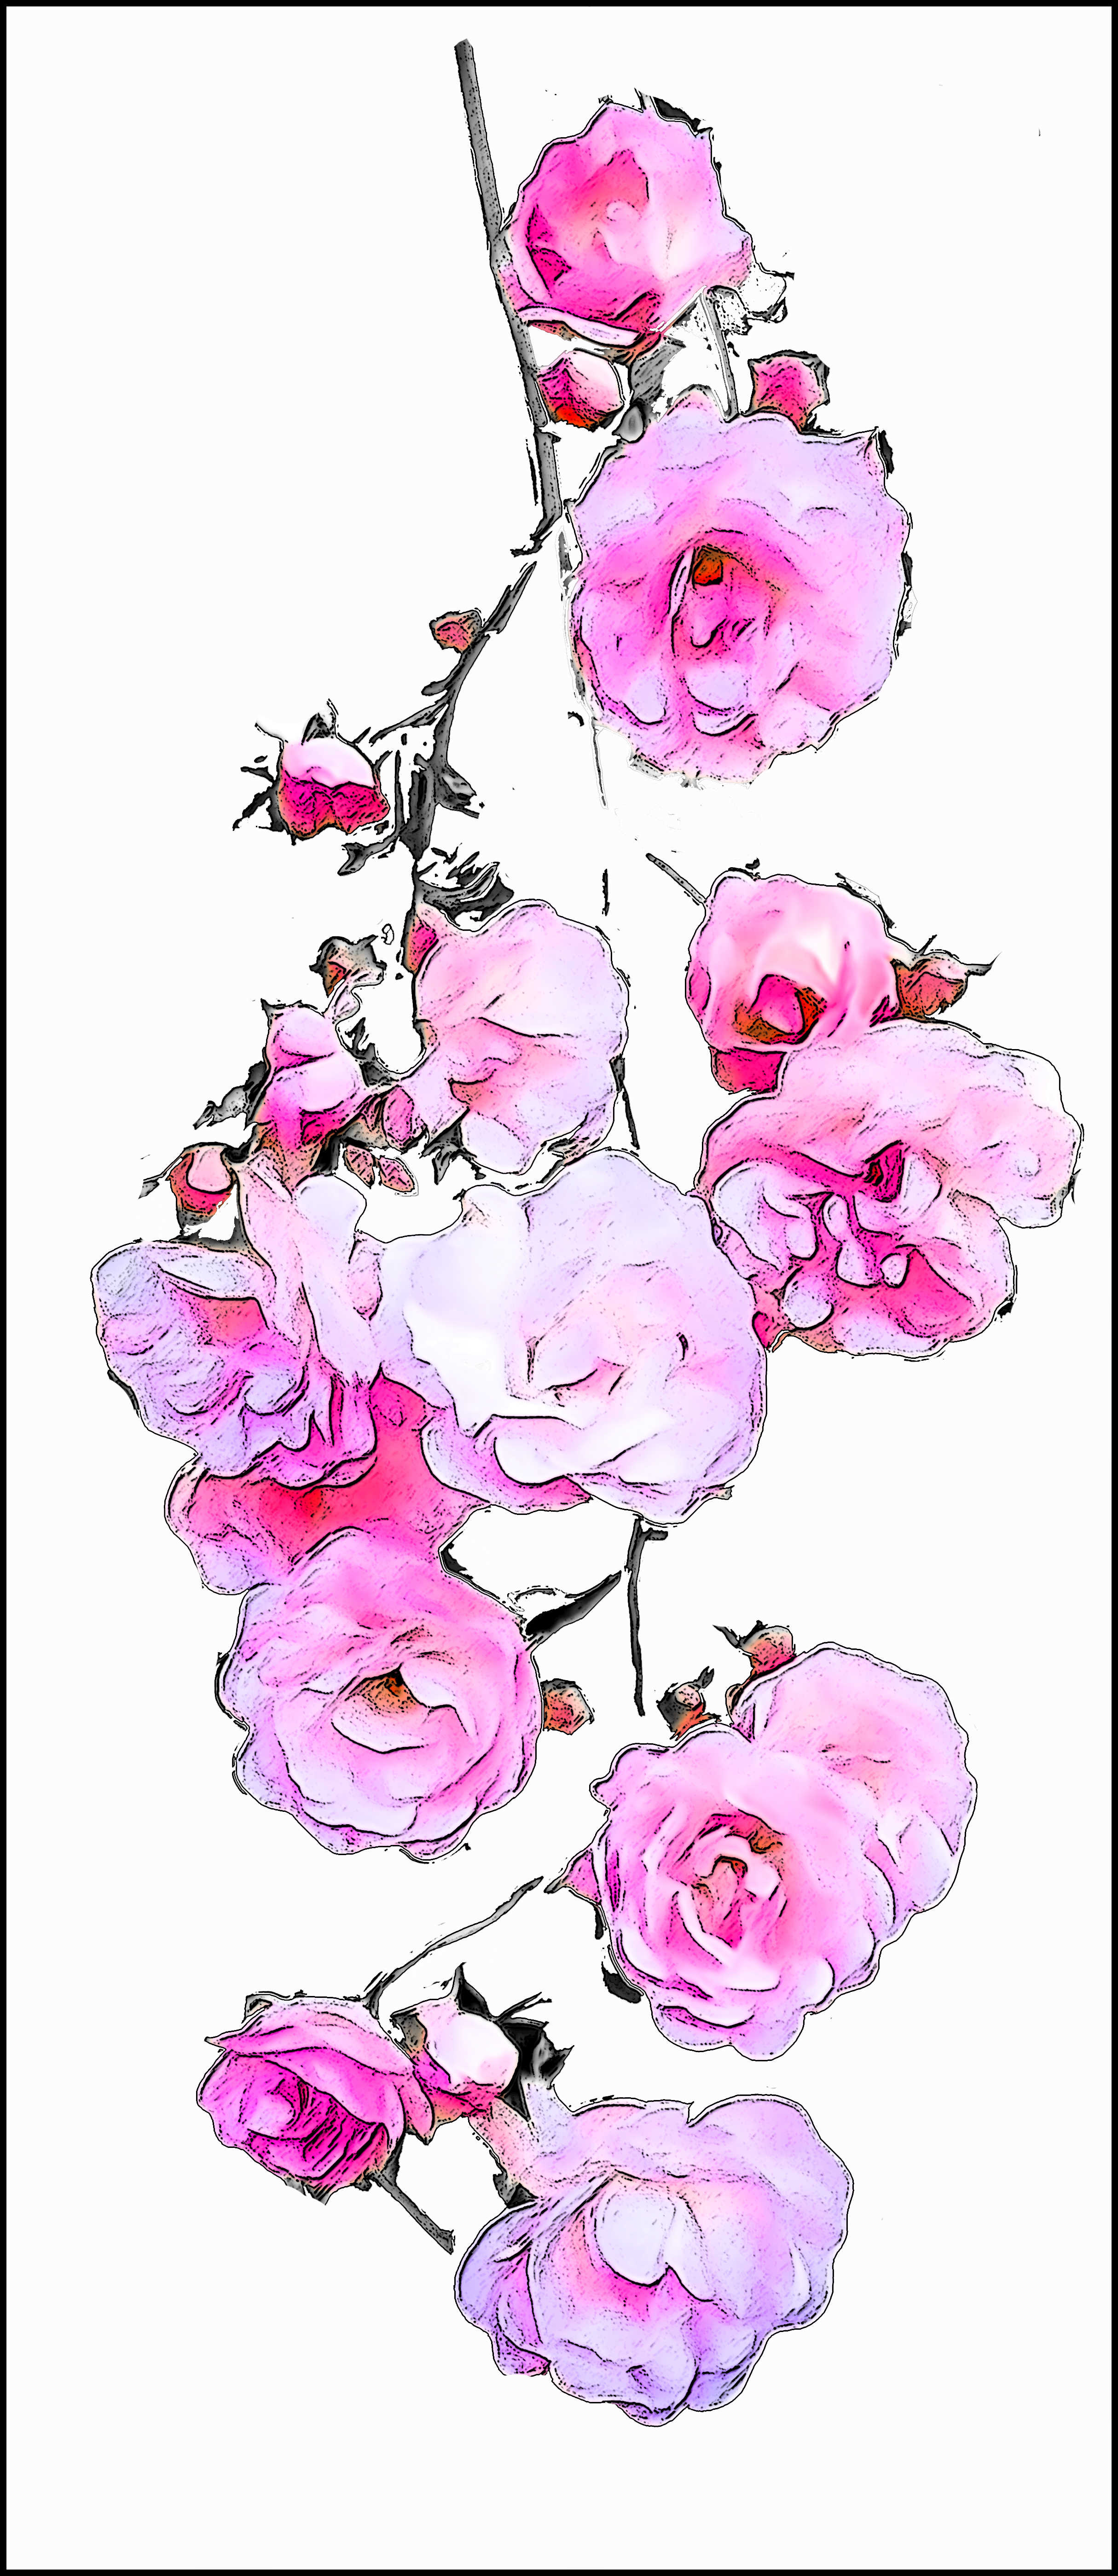 Hanging delightful pink roses
A3+ on Hot Press paper £45